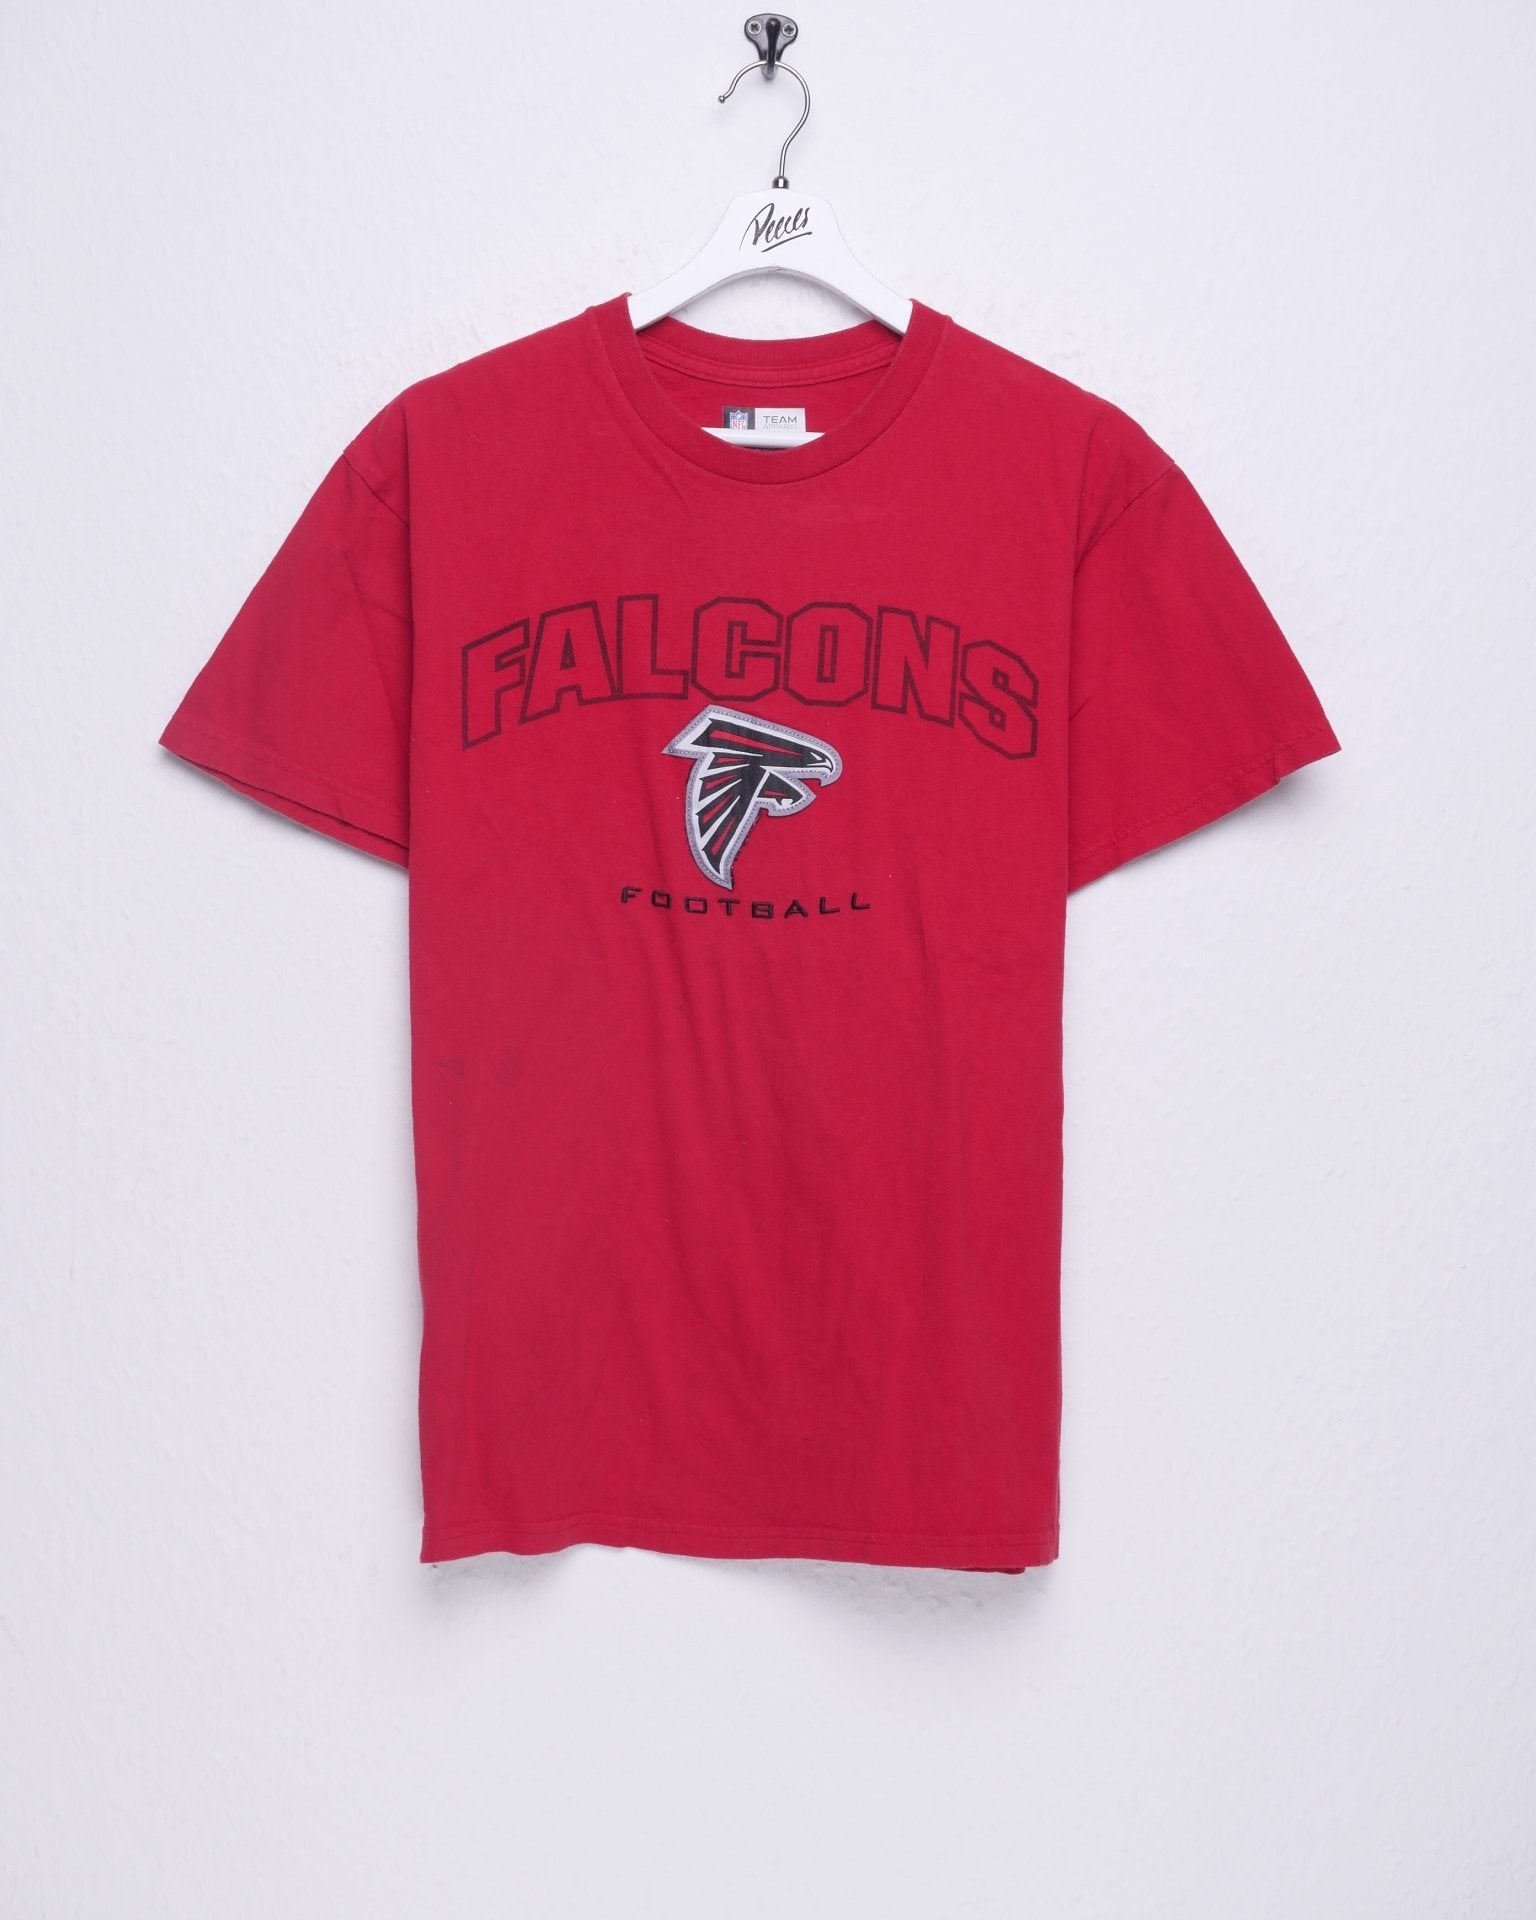 NFL embroidered Logo 'Falcons Football' washed red Shirt - Peeces